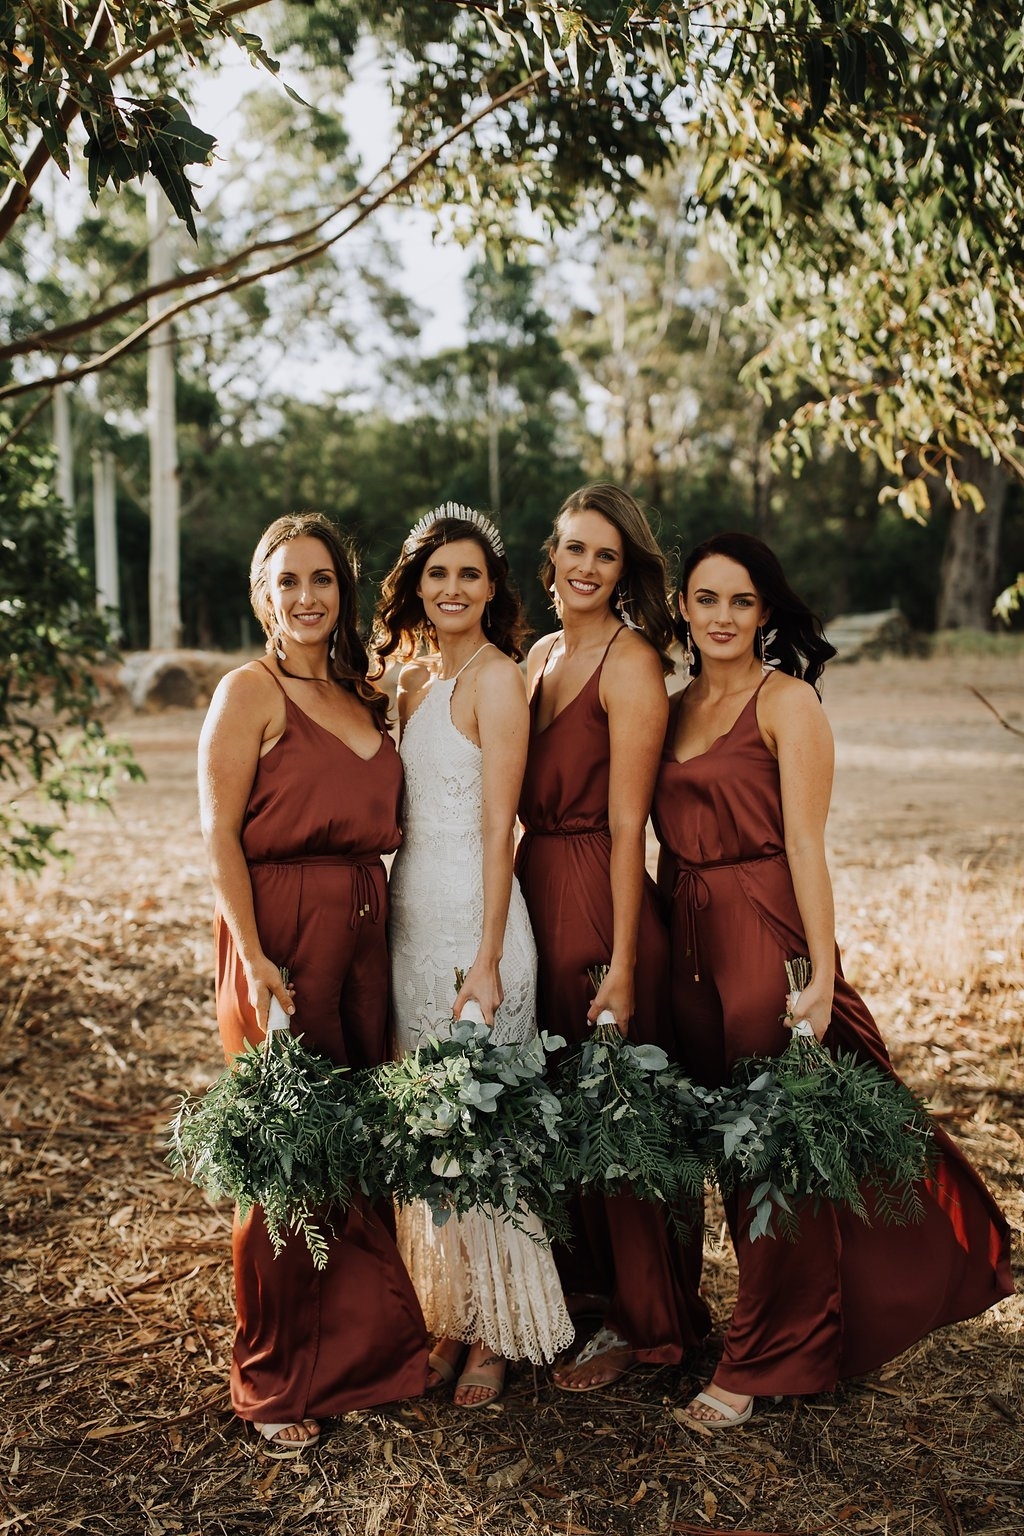 rust bridesmaid dresses and white bridal gown for navy gold and rust wedding color combo